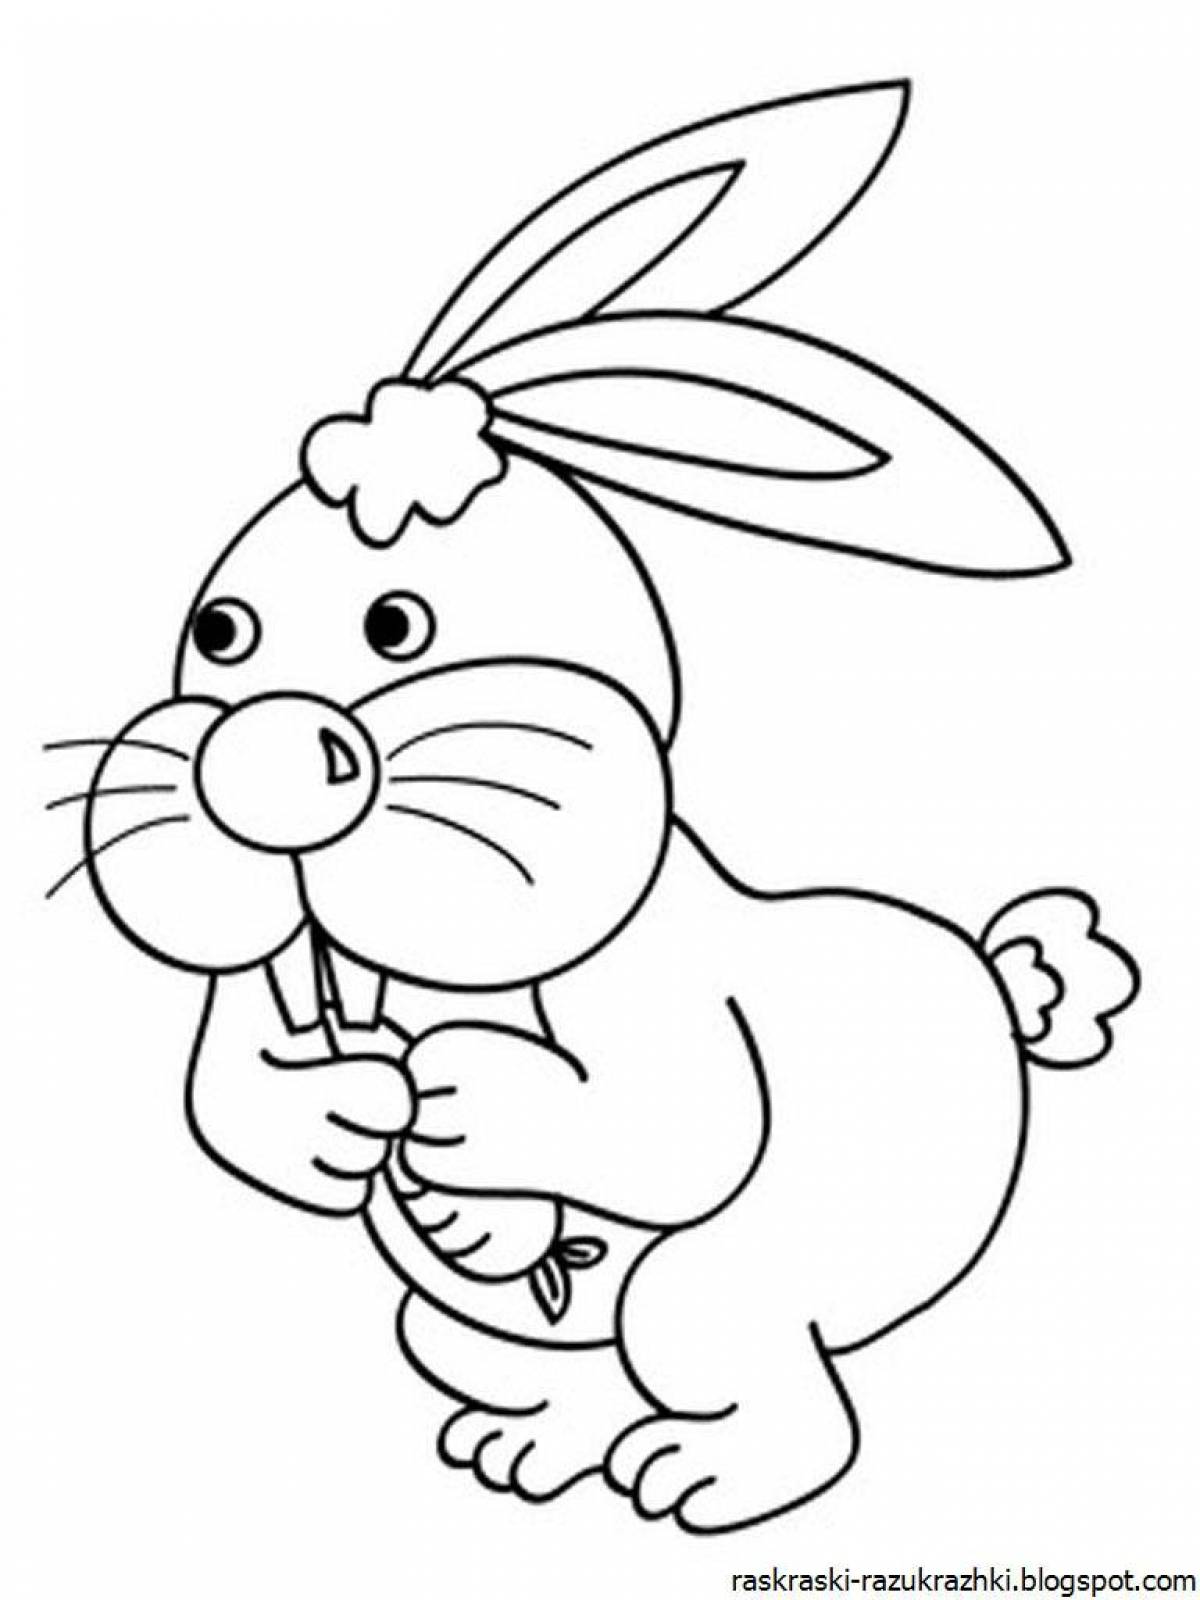 Coloring rabbit with a floppy disk for children